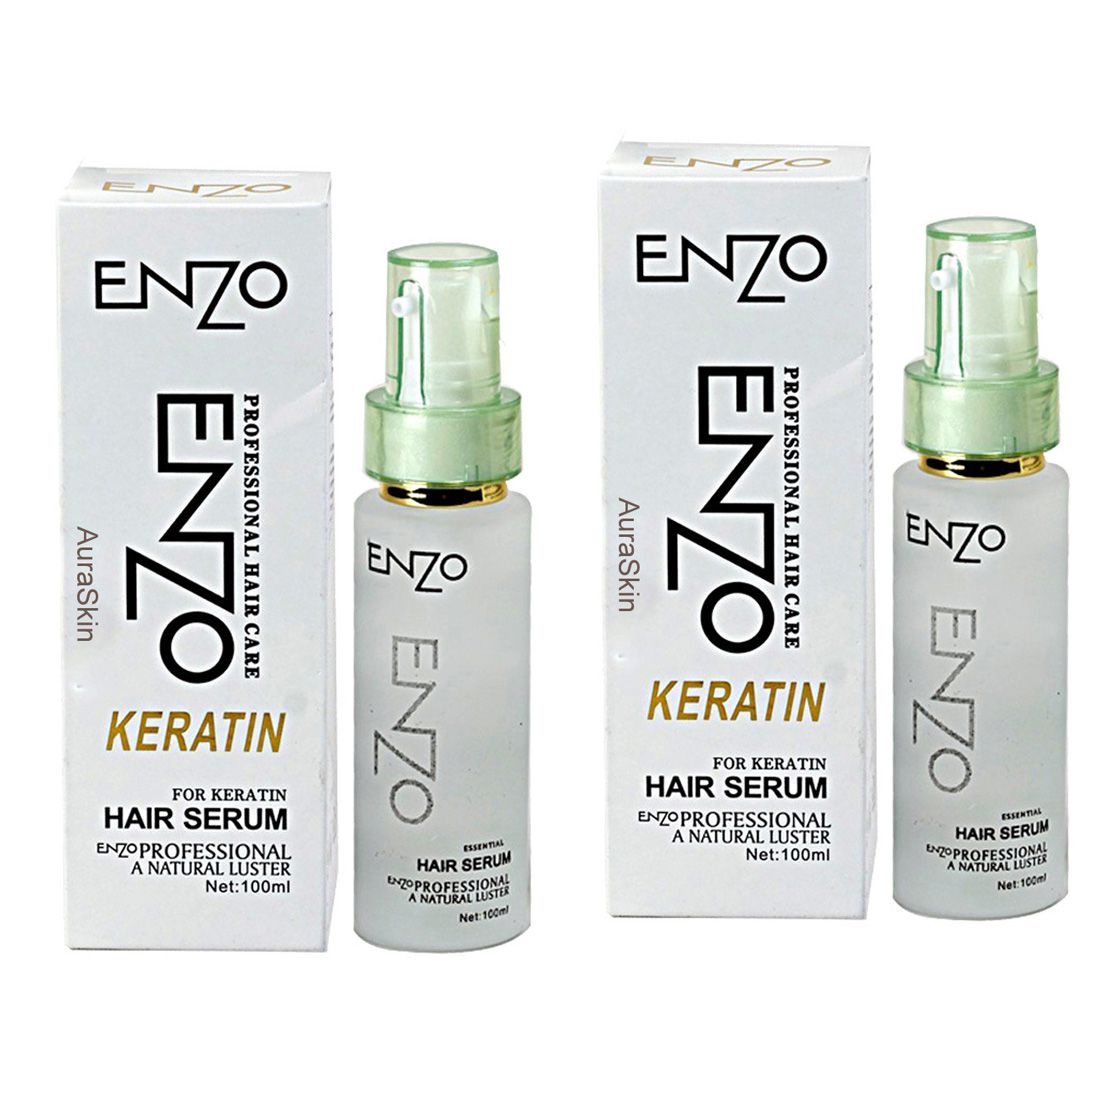 AuraSkin ENZO HAIR SERUM Hair Serum 100 ml Pack of 2: Buy AuraSkin ENZO  HAIR SERUM Hair Serum 100 ml Pack of 2 at Best Prices in India - Snapdeal